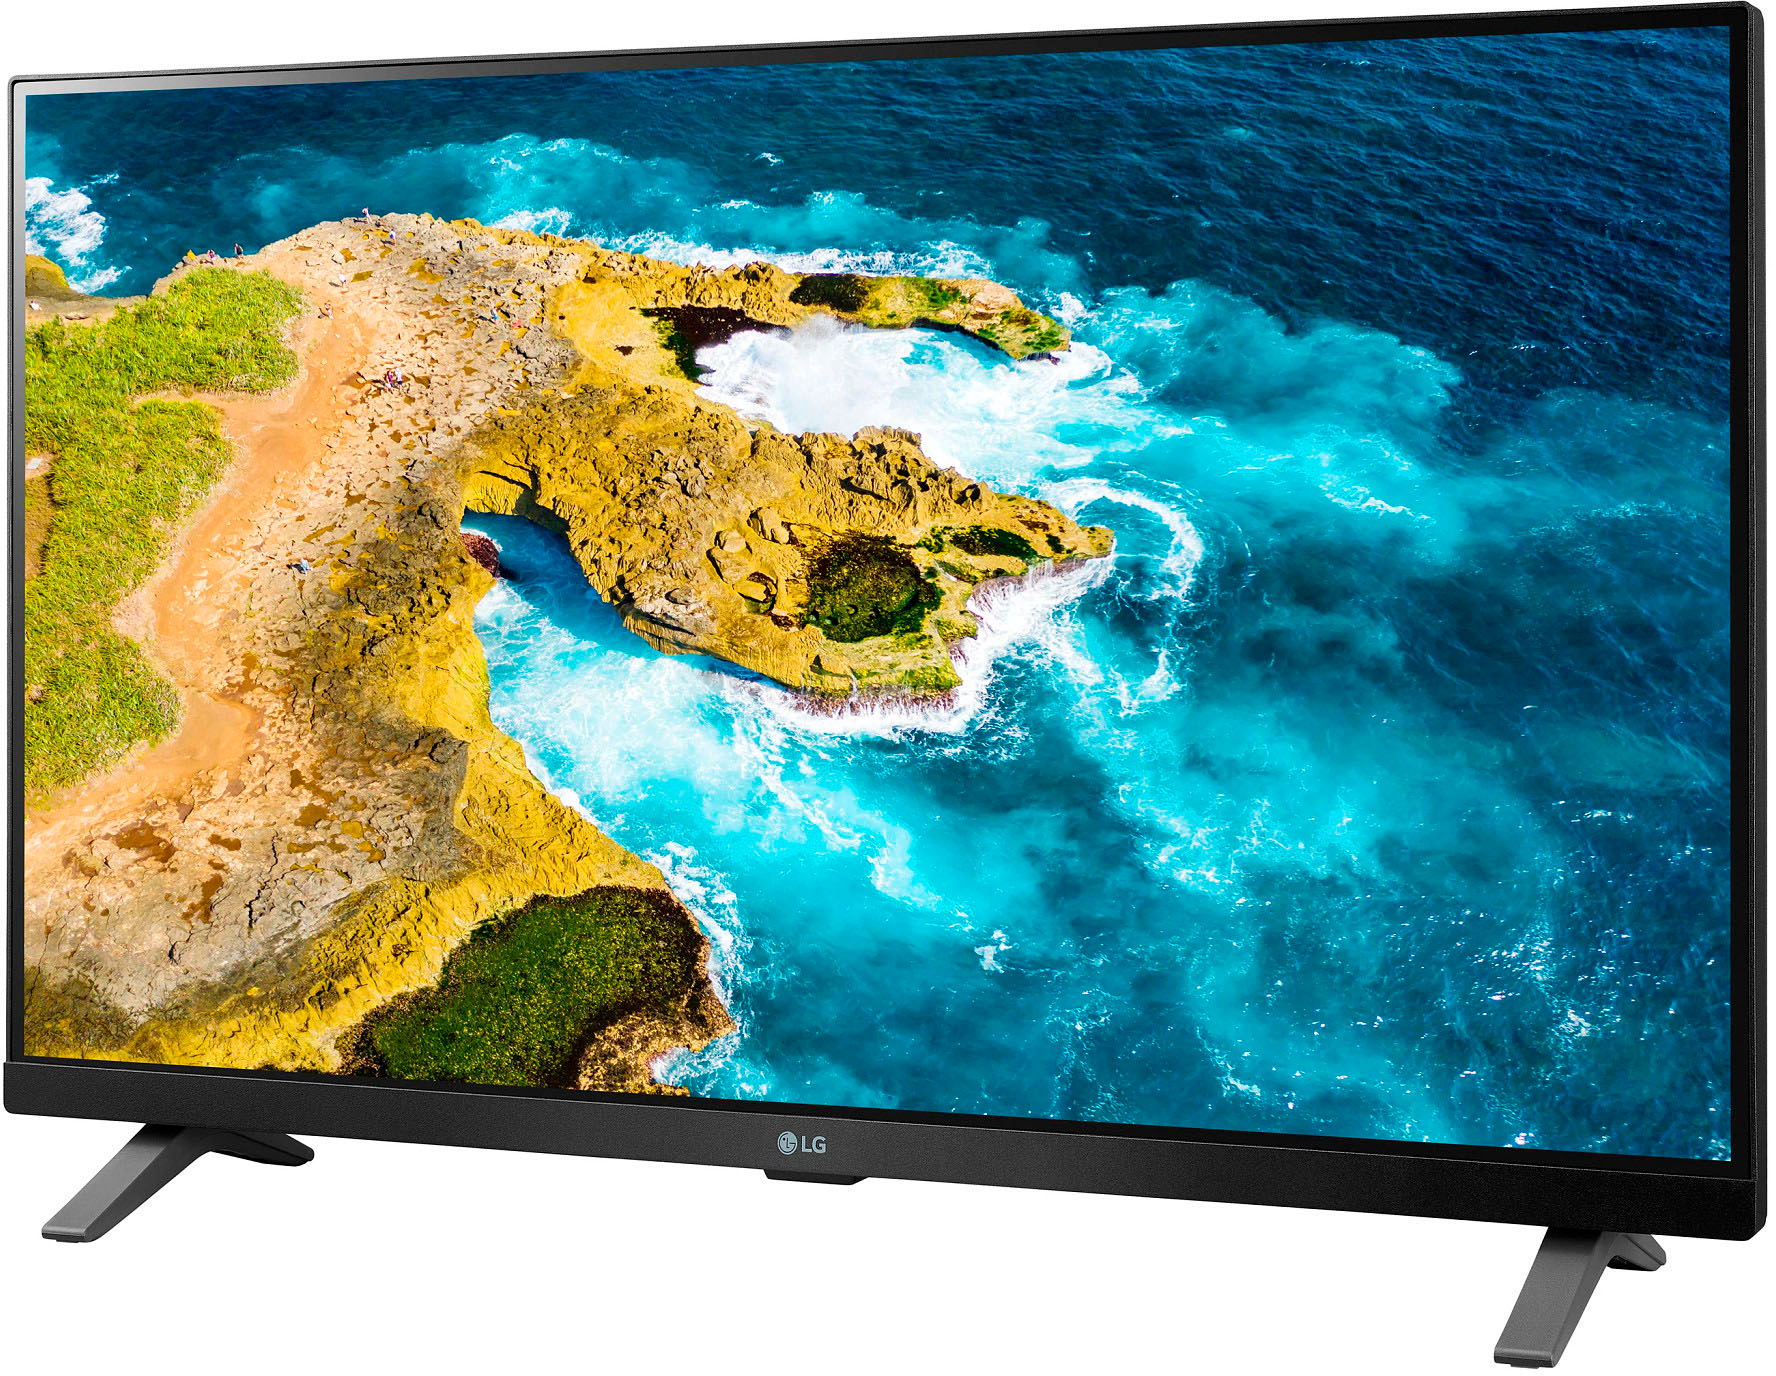 Angle View: LG - 27" Class LED Full HD Smart TV with webOS